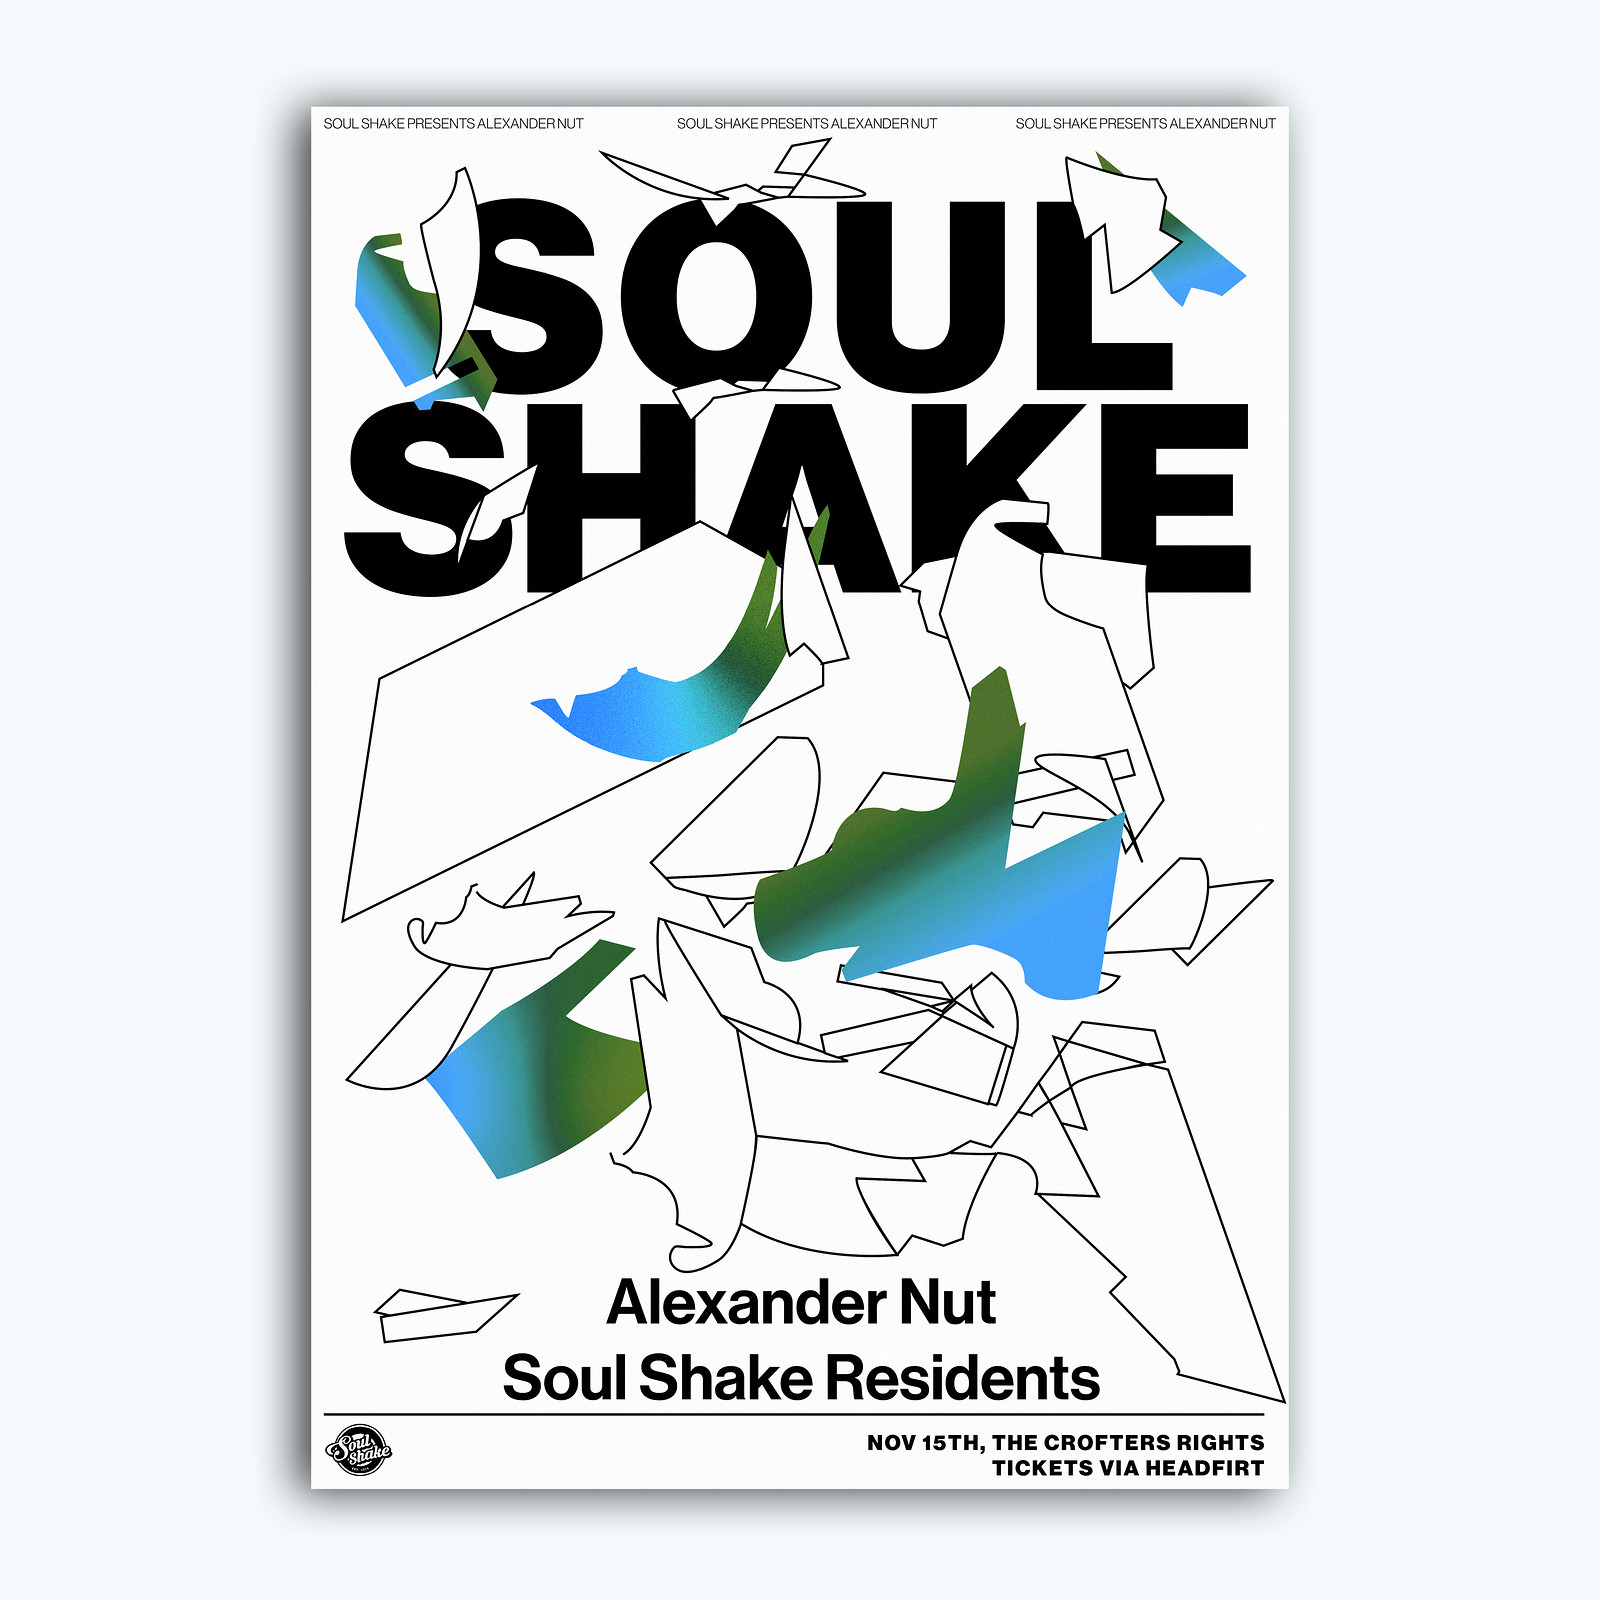 Soul Shake Presents: Alexander Nut at Crofters Rights